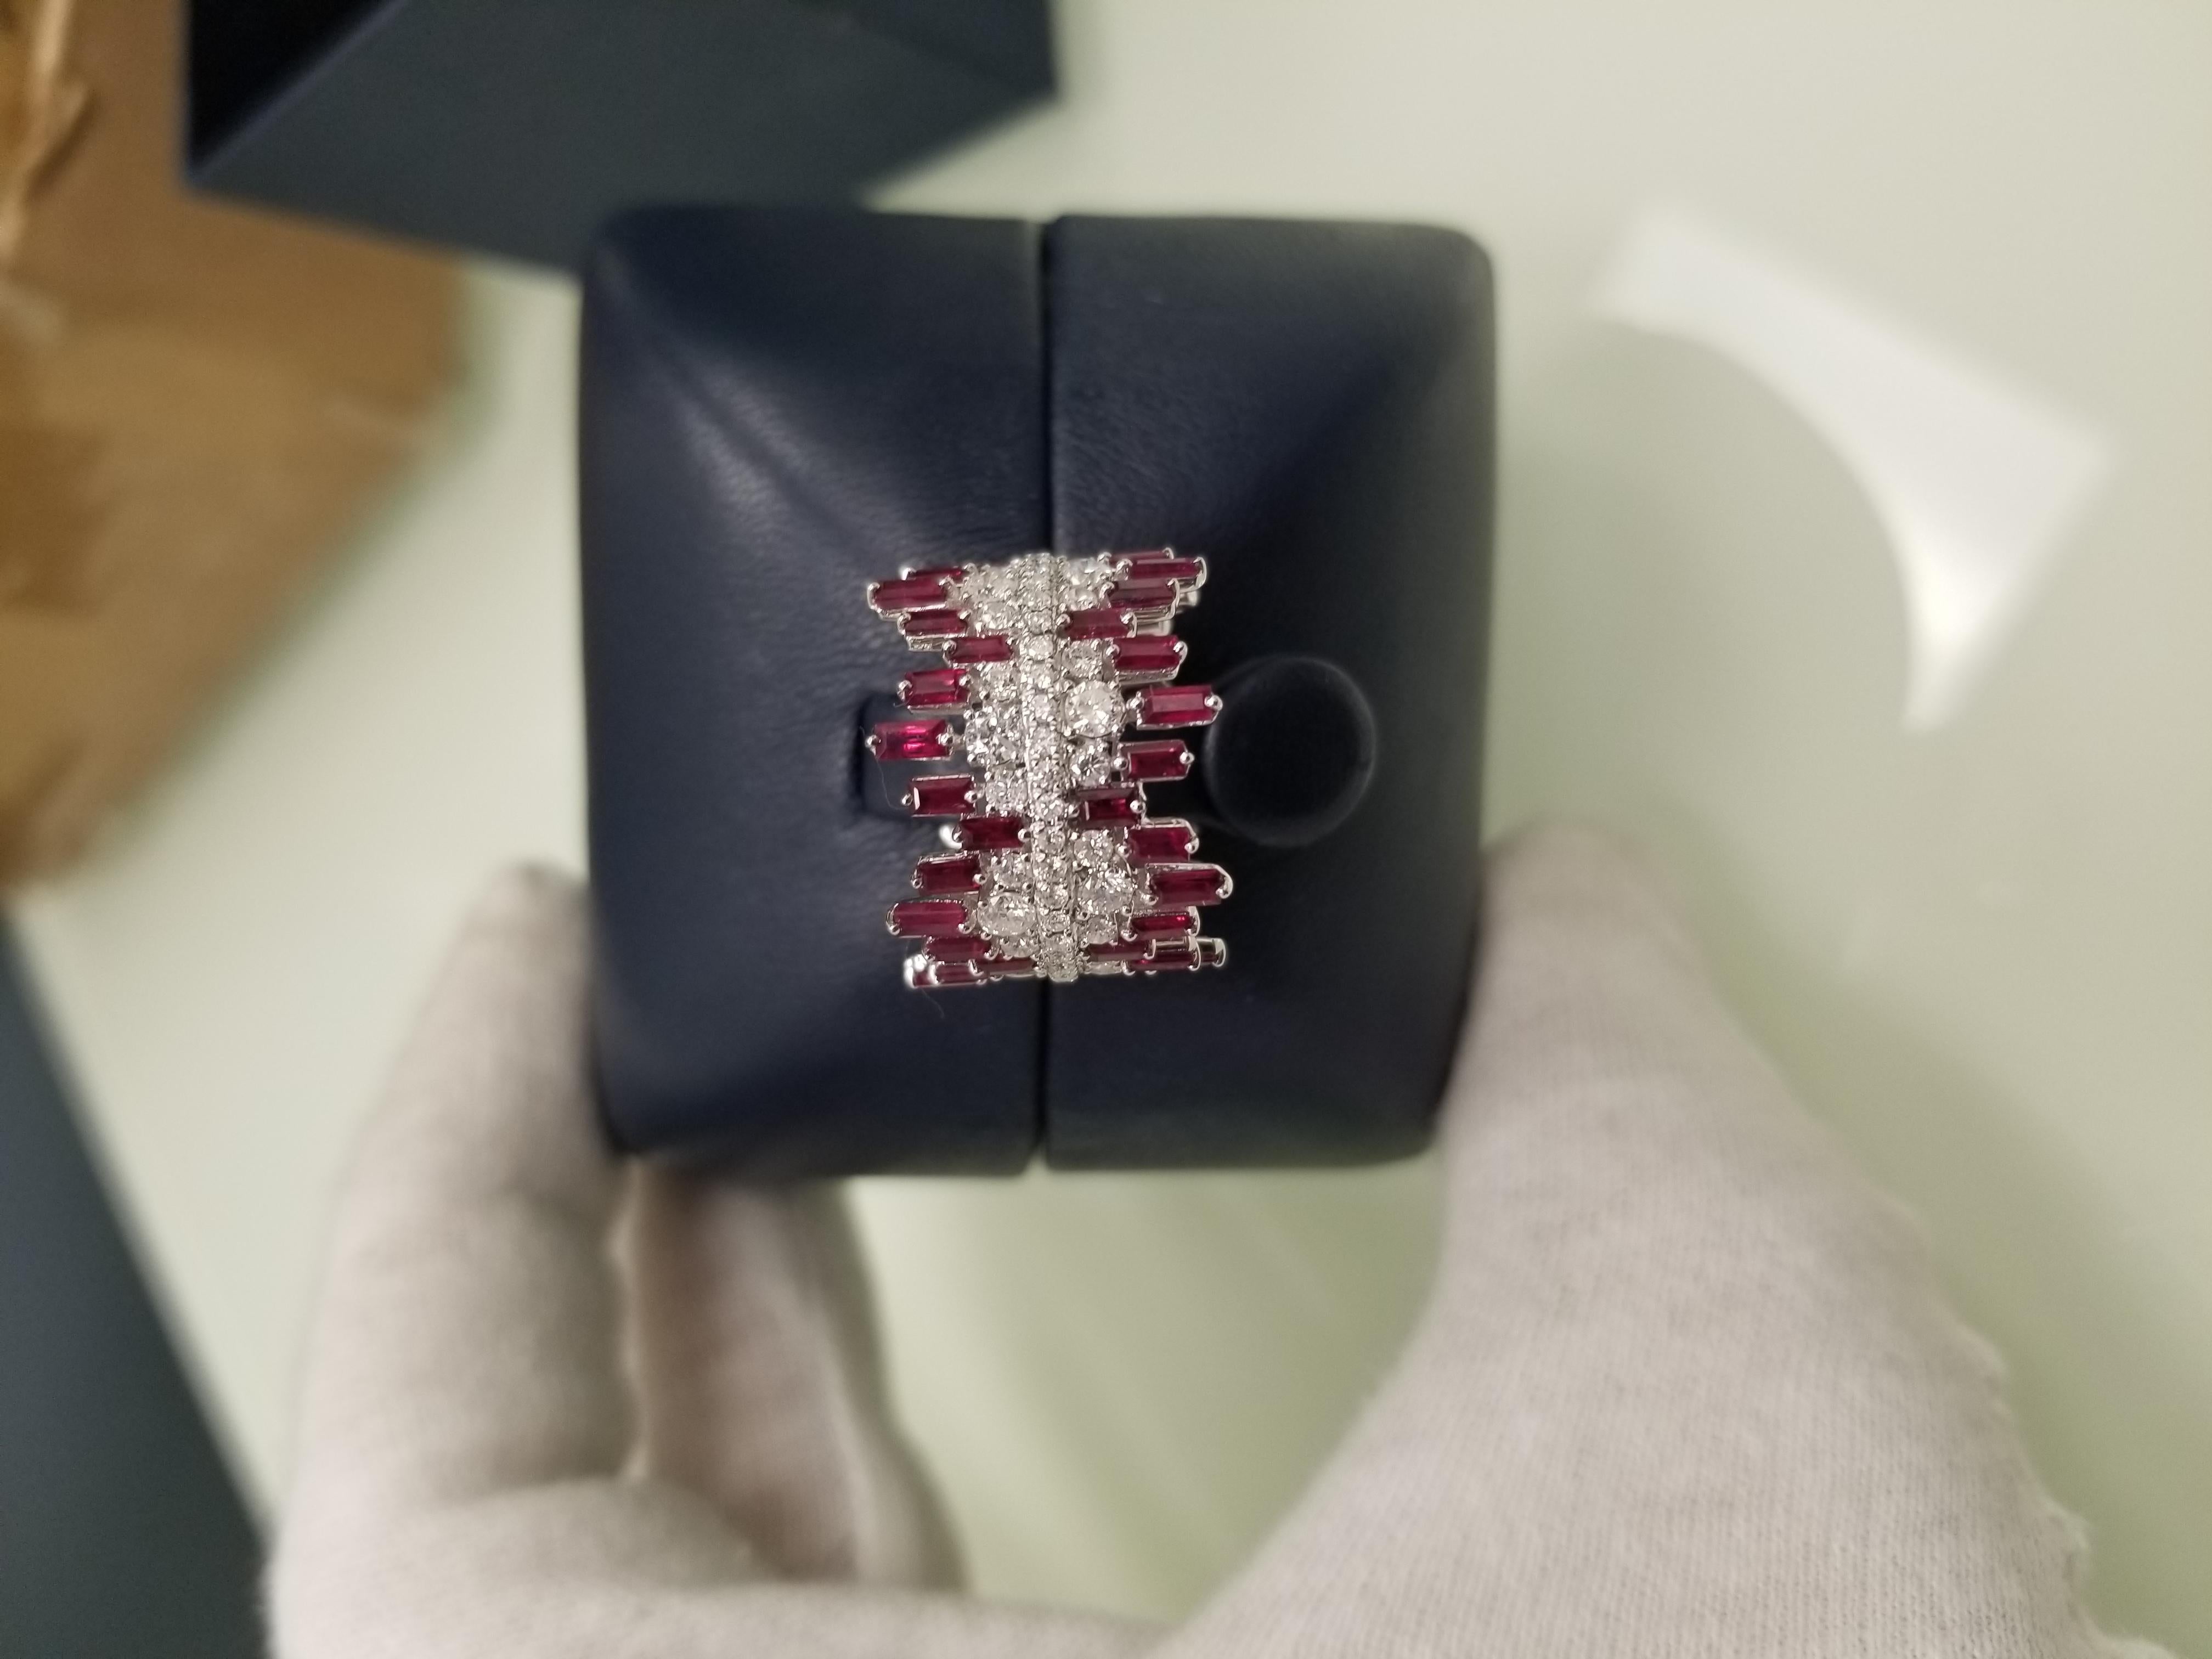 Absolutely one of a kind the Majestic ring took several months just to fit perfectly top quality gorgeous colors from the ruby's. Guaranteed compliment better wilmo's death may be a favorite piece in the jewelry collection. Master jeweler is